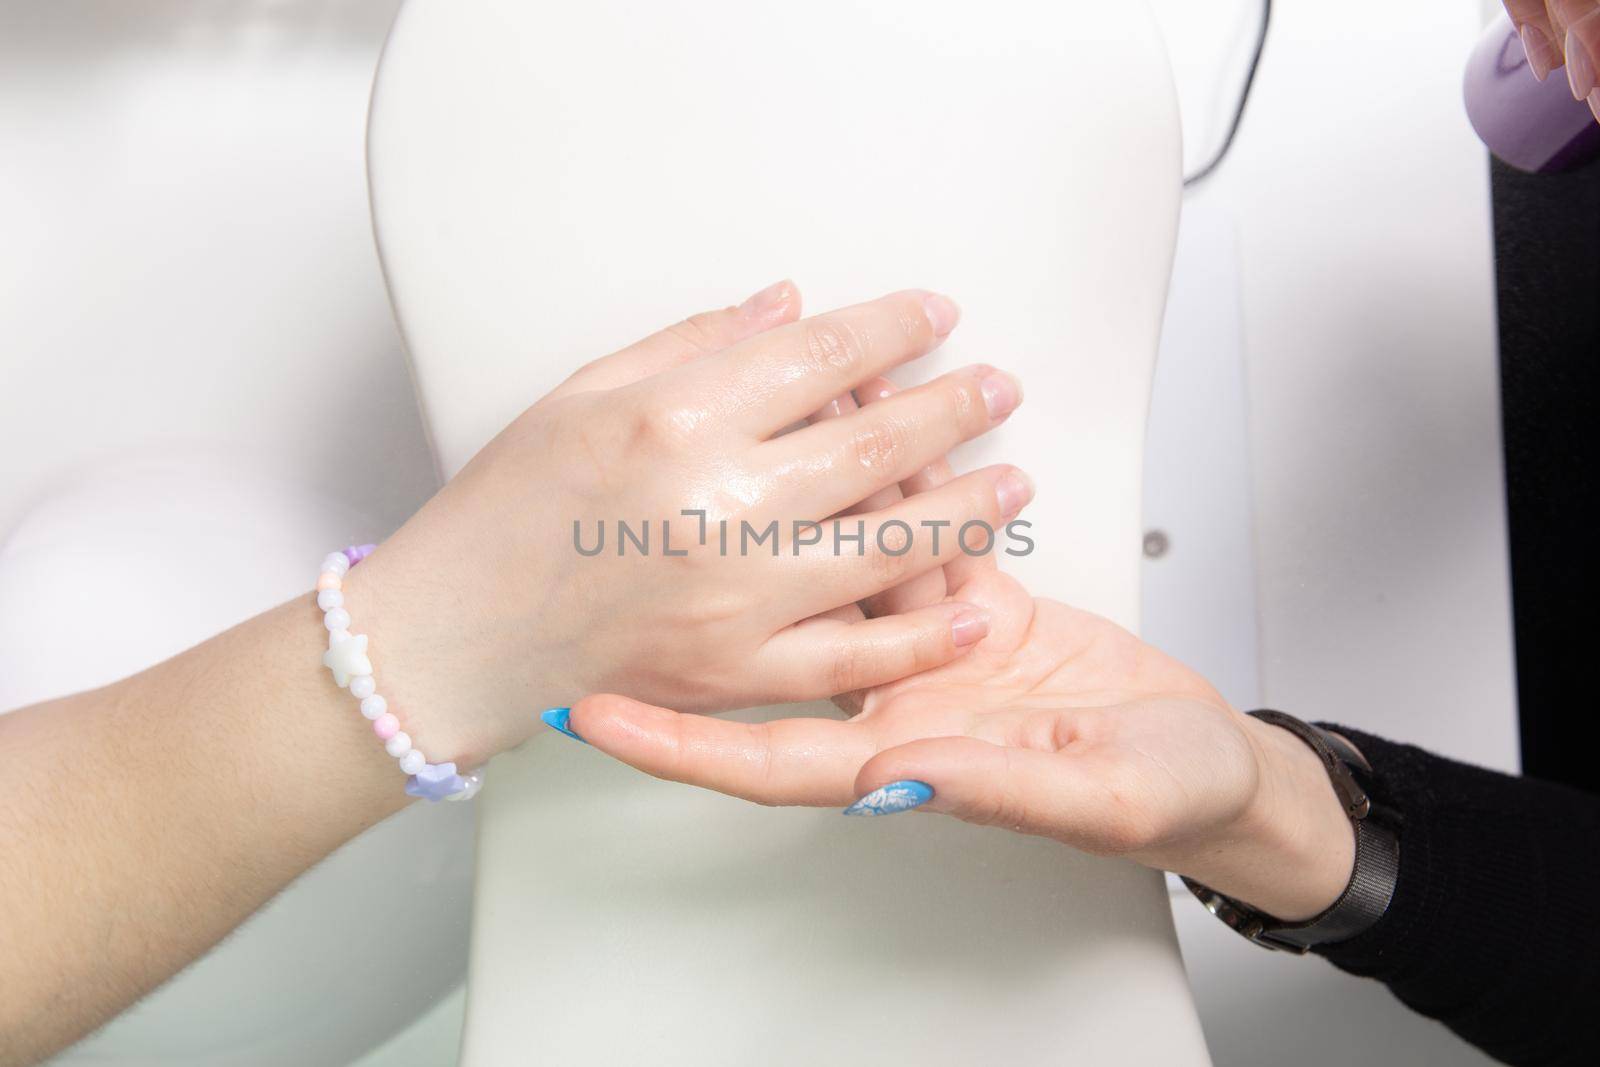 Manicurist sprays antiseptic on the nails before treating old acrylic nails. Treatment of nails with a disinfectant before manicure. Applying a disinfectant to women